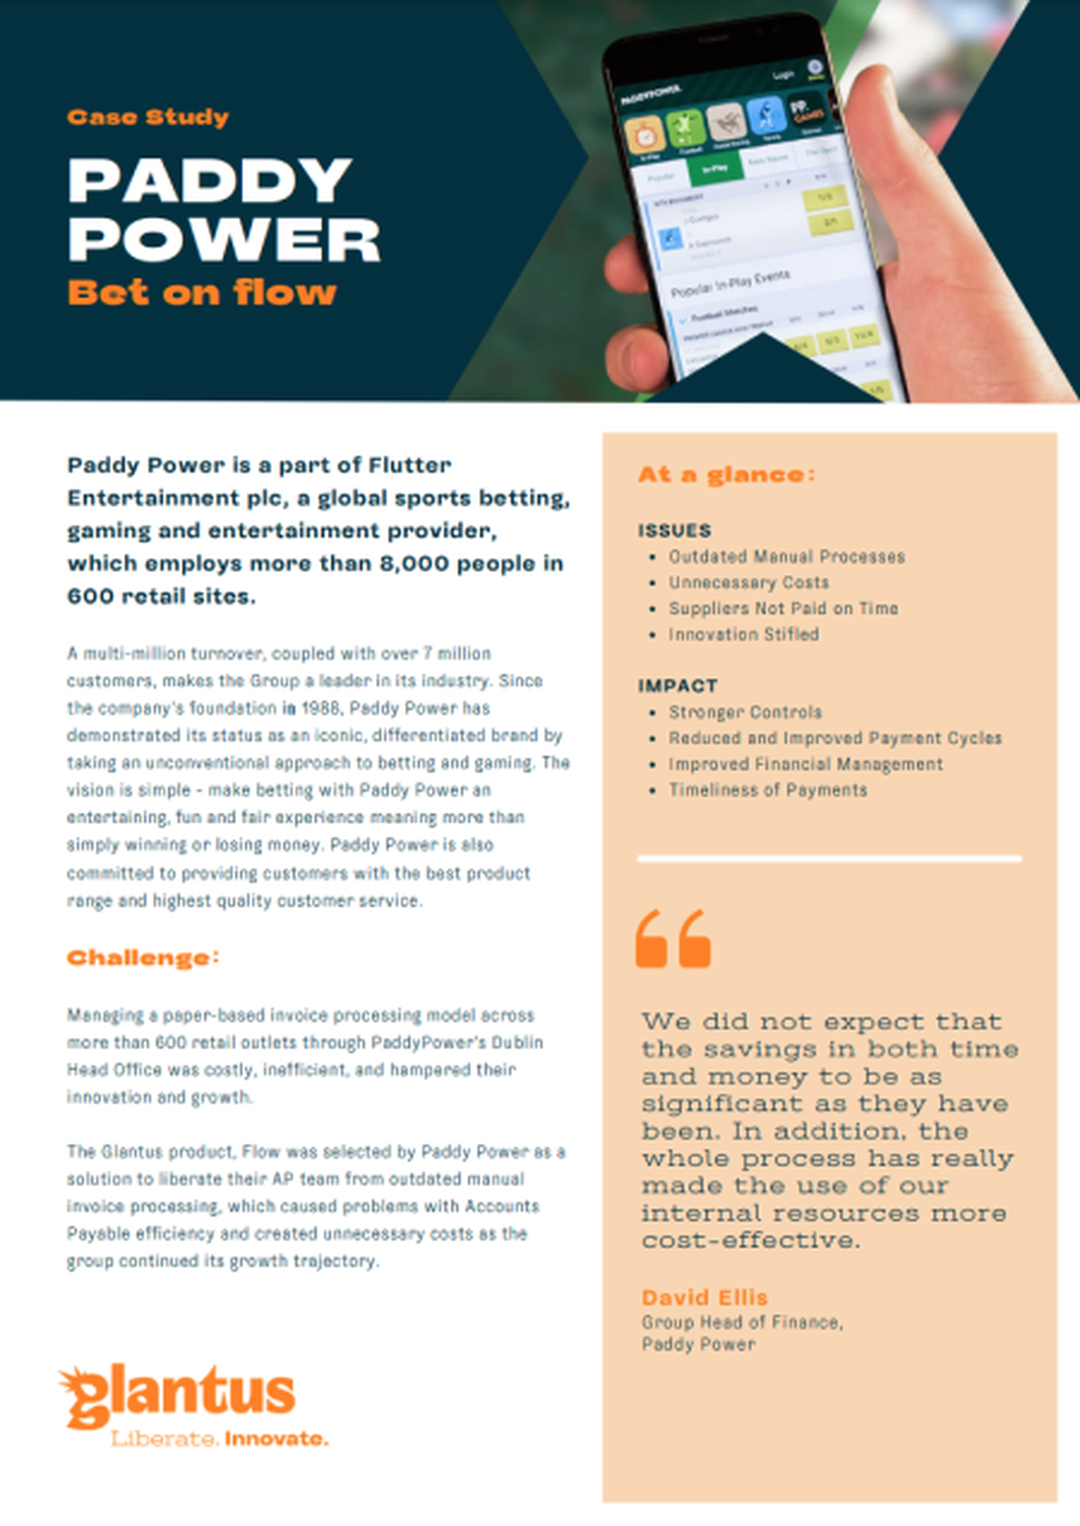 Paddy Power eliminated manual invoice processing and added stronger control. 